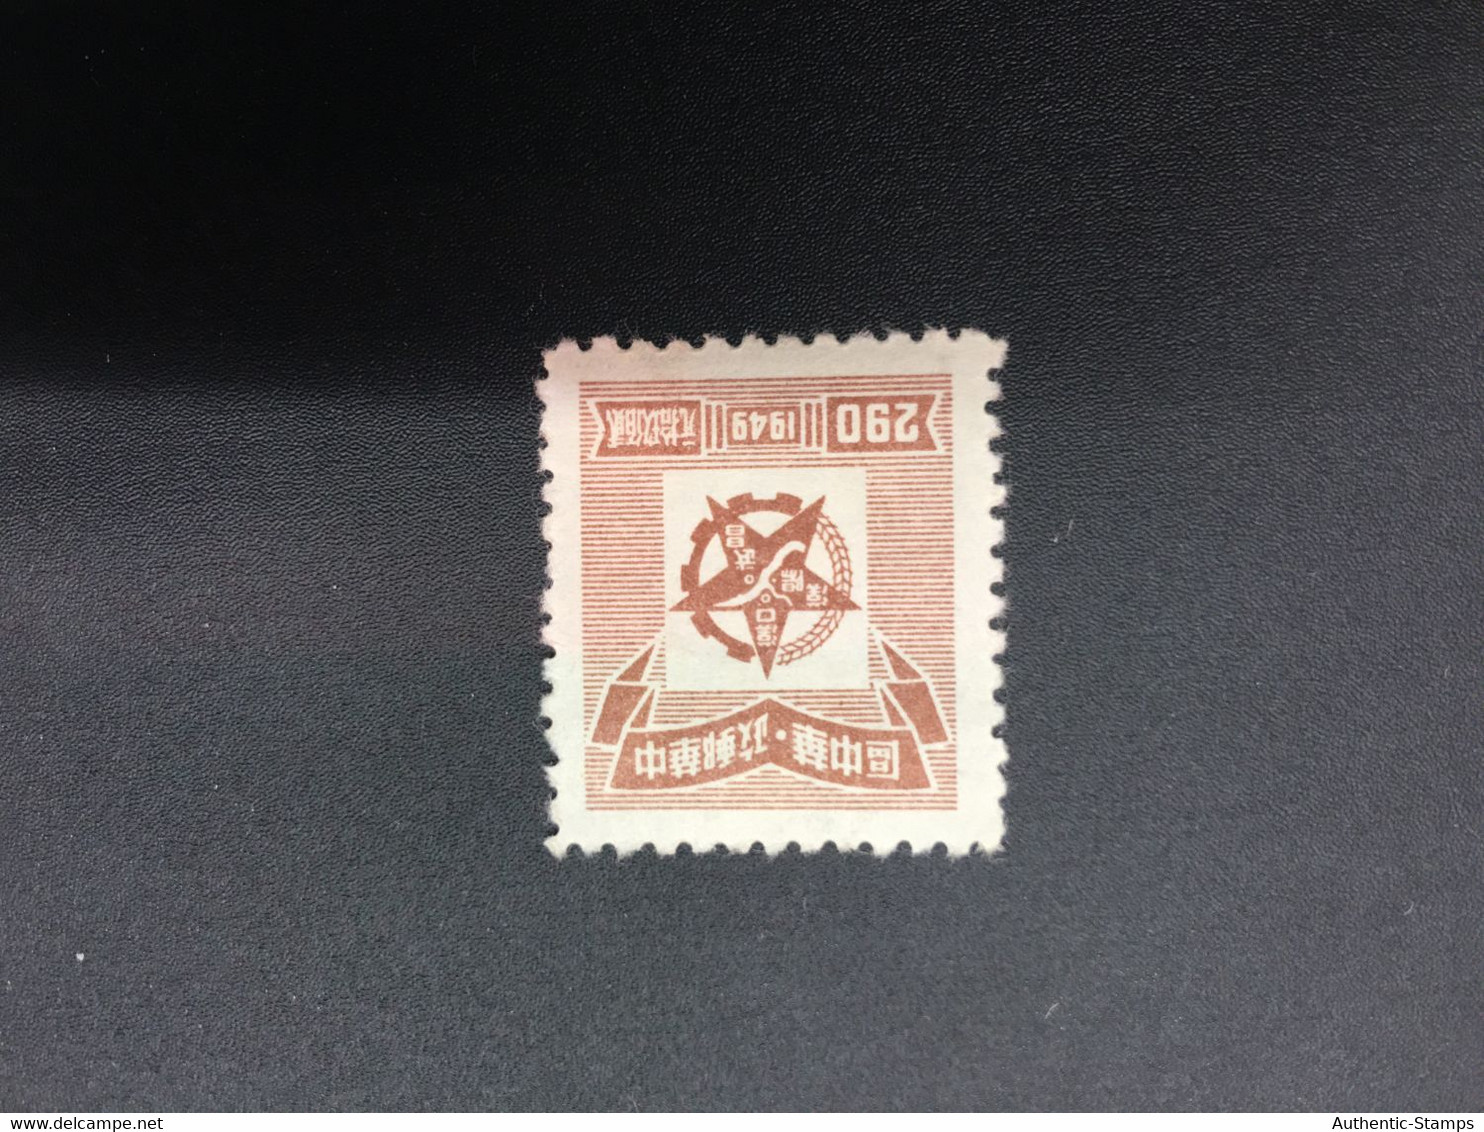 CHINA STAMP,  Unused, TIMBRO, STEMPEL,  CINA, CHINE, LIST 7818 - Centraal-China 1948-49